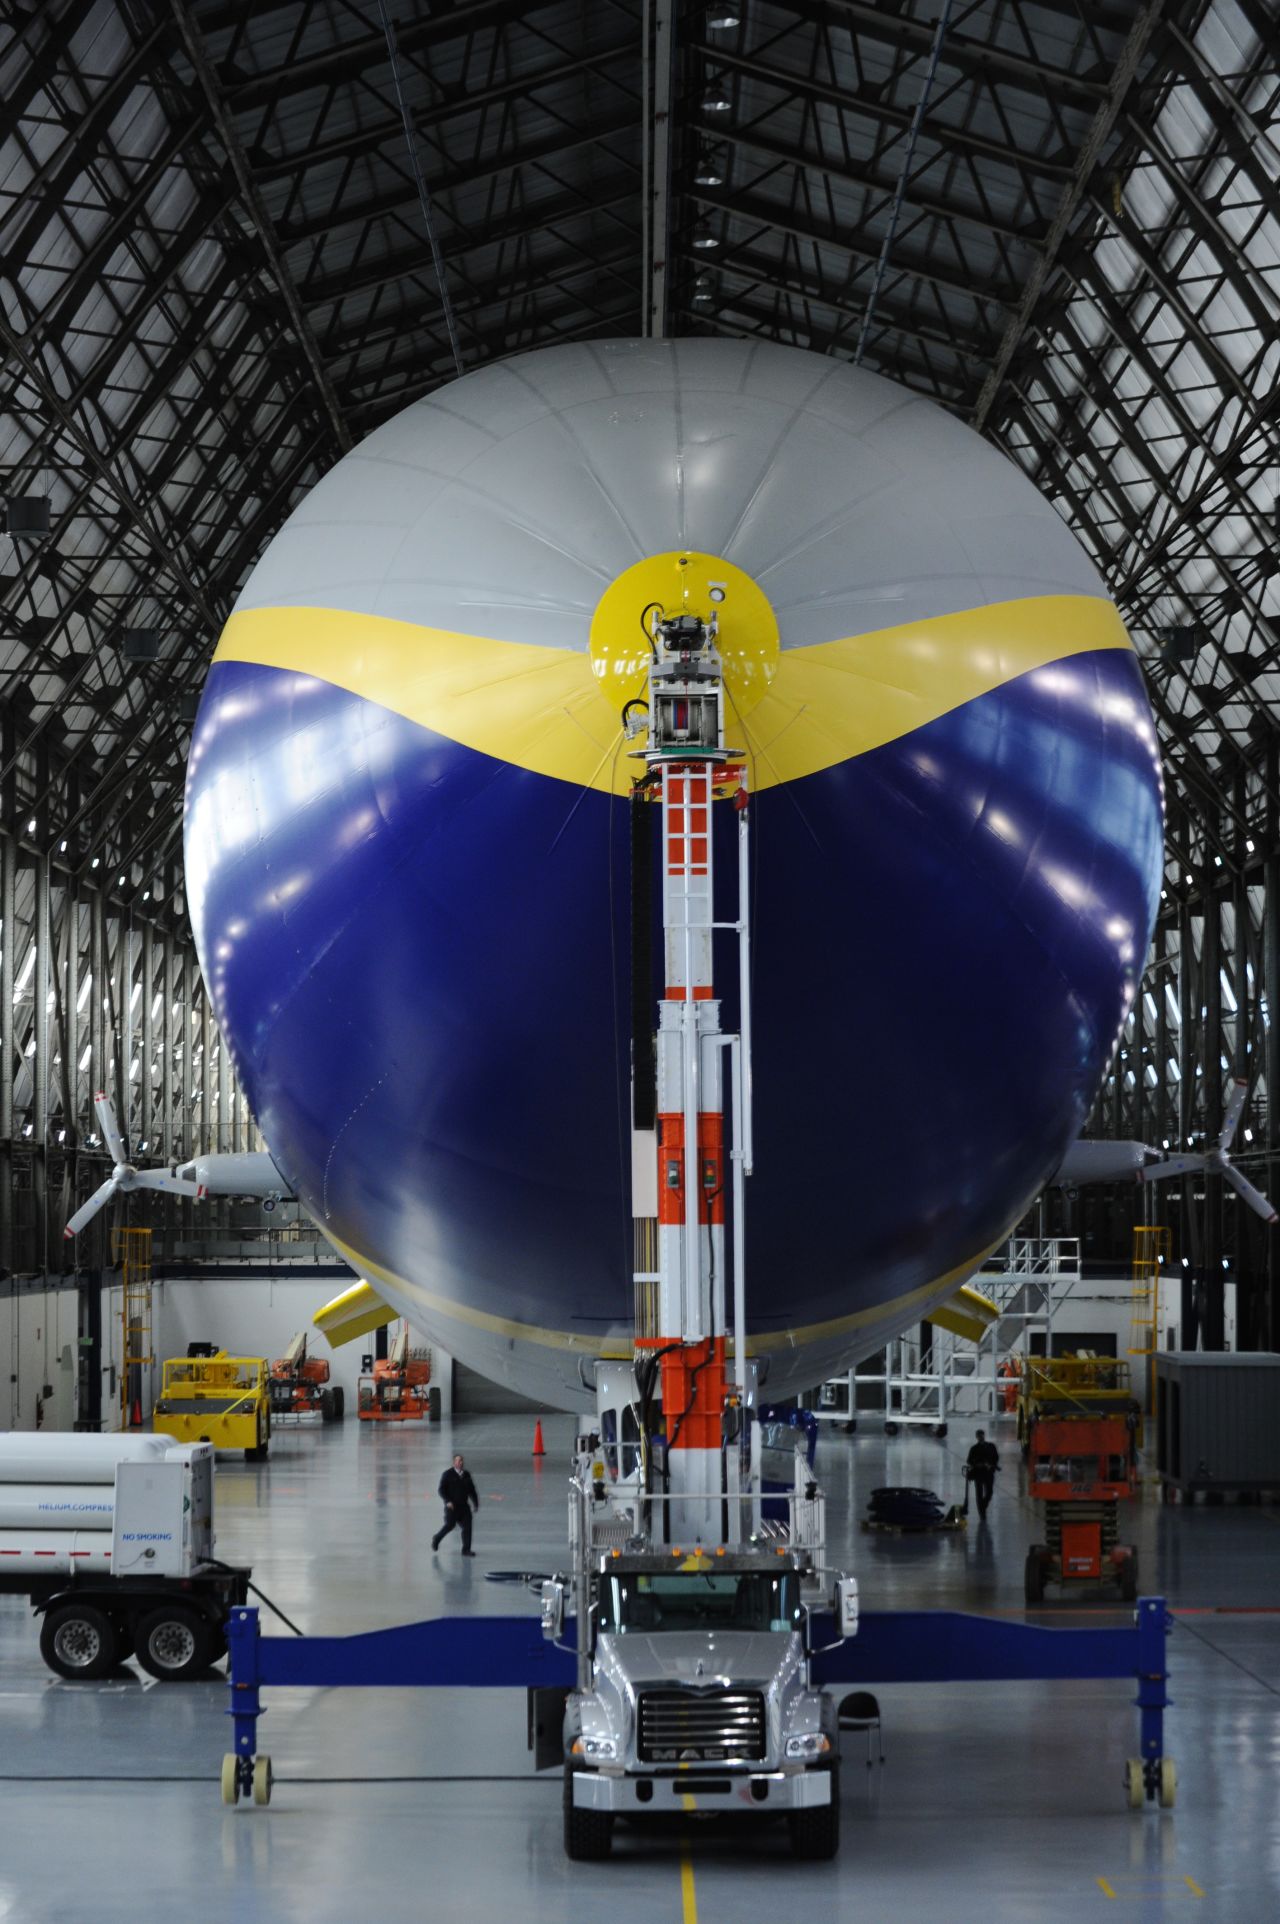 Keeping tabs on your blimp is easy if you have a mast to attach it to. This mast inside the Goodyear hangar has the Zeppelin's nose cone in its clutches.